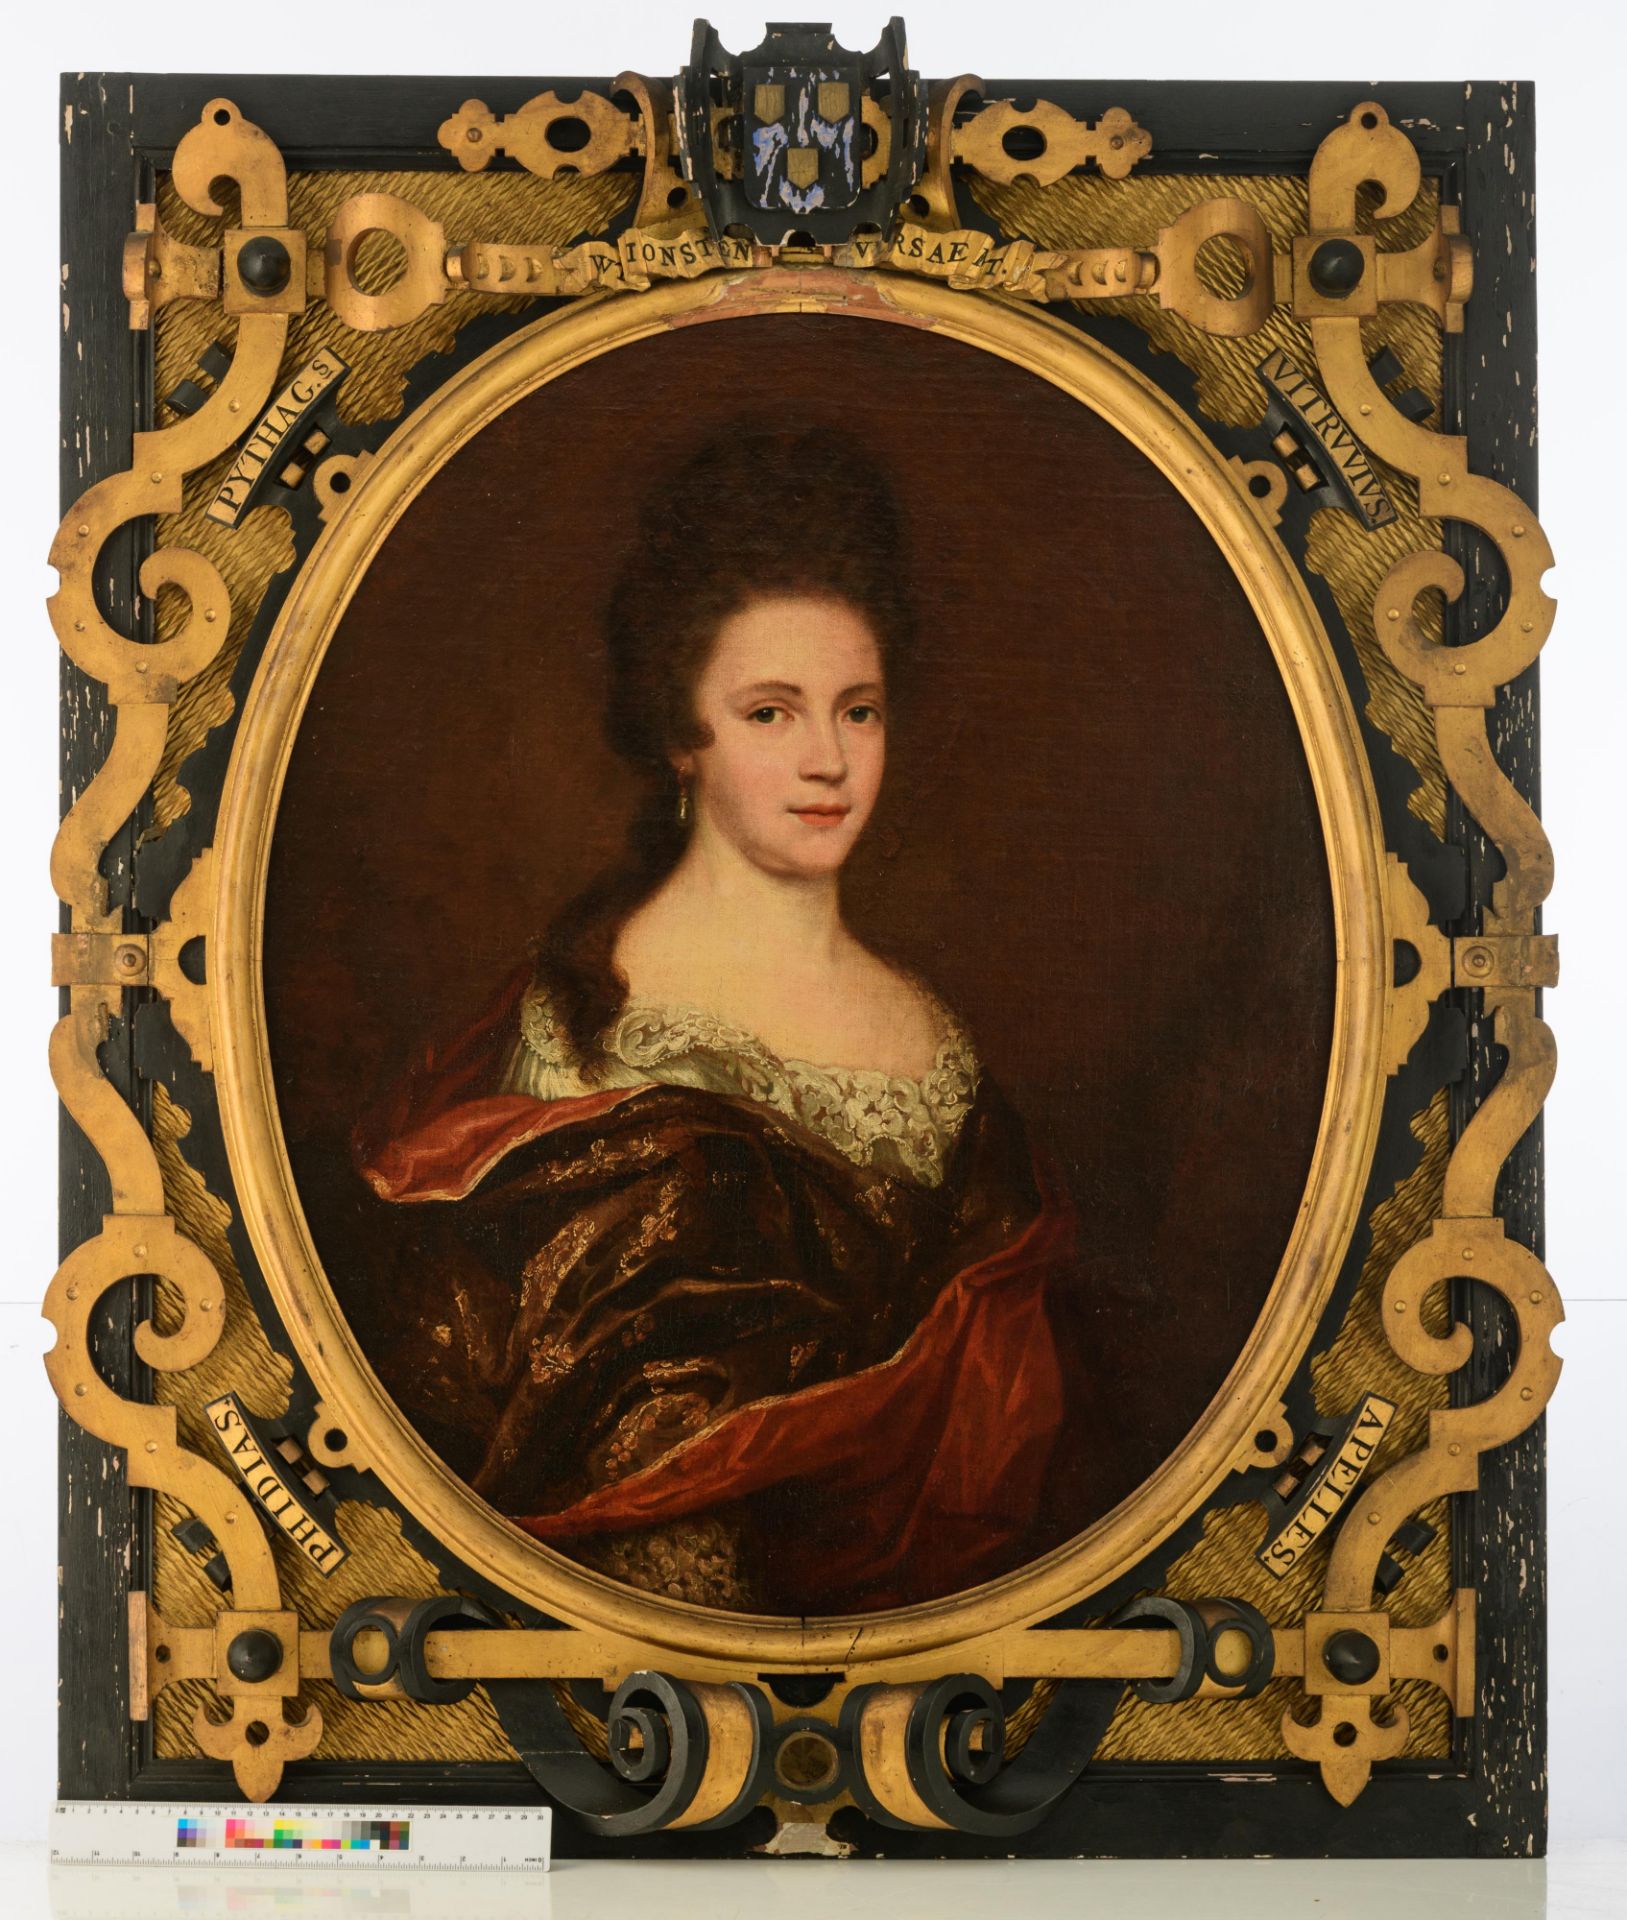 No visible signature, the medallion portrait of a lady wearing a lace corsage, late 17thC, English, - Image 12 of 12